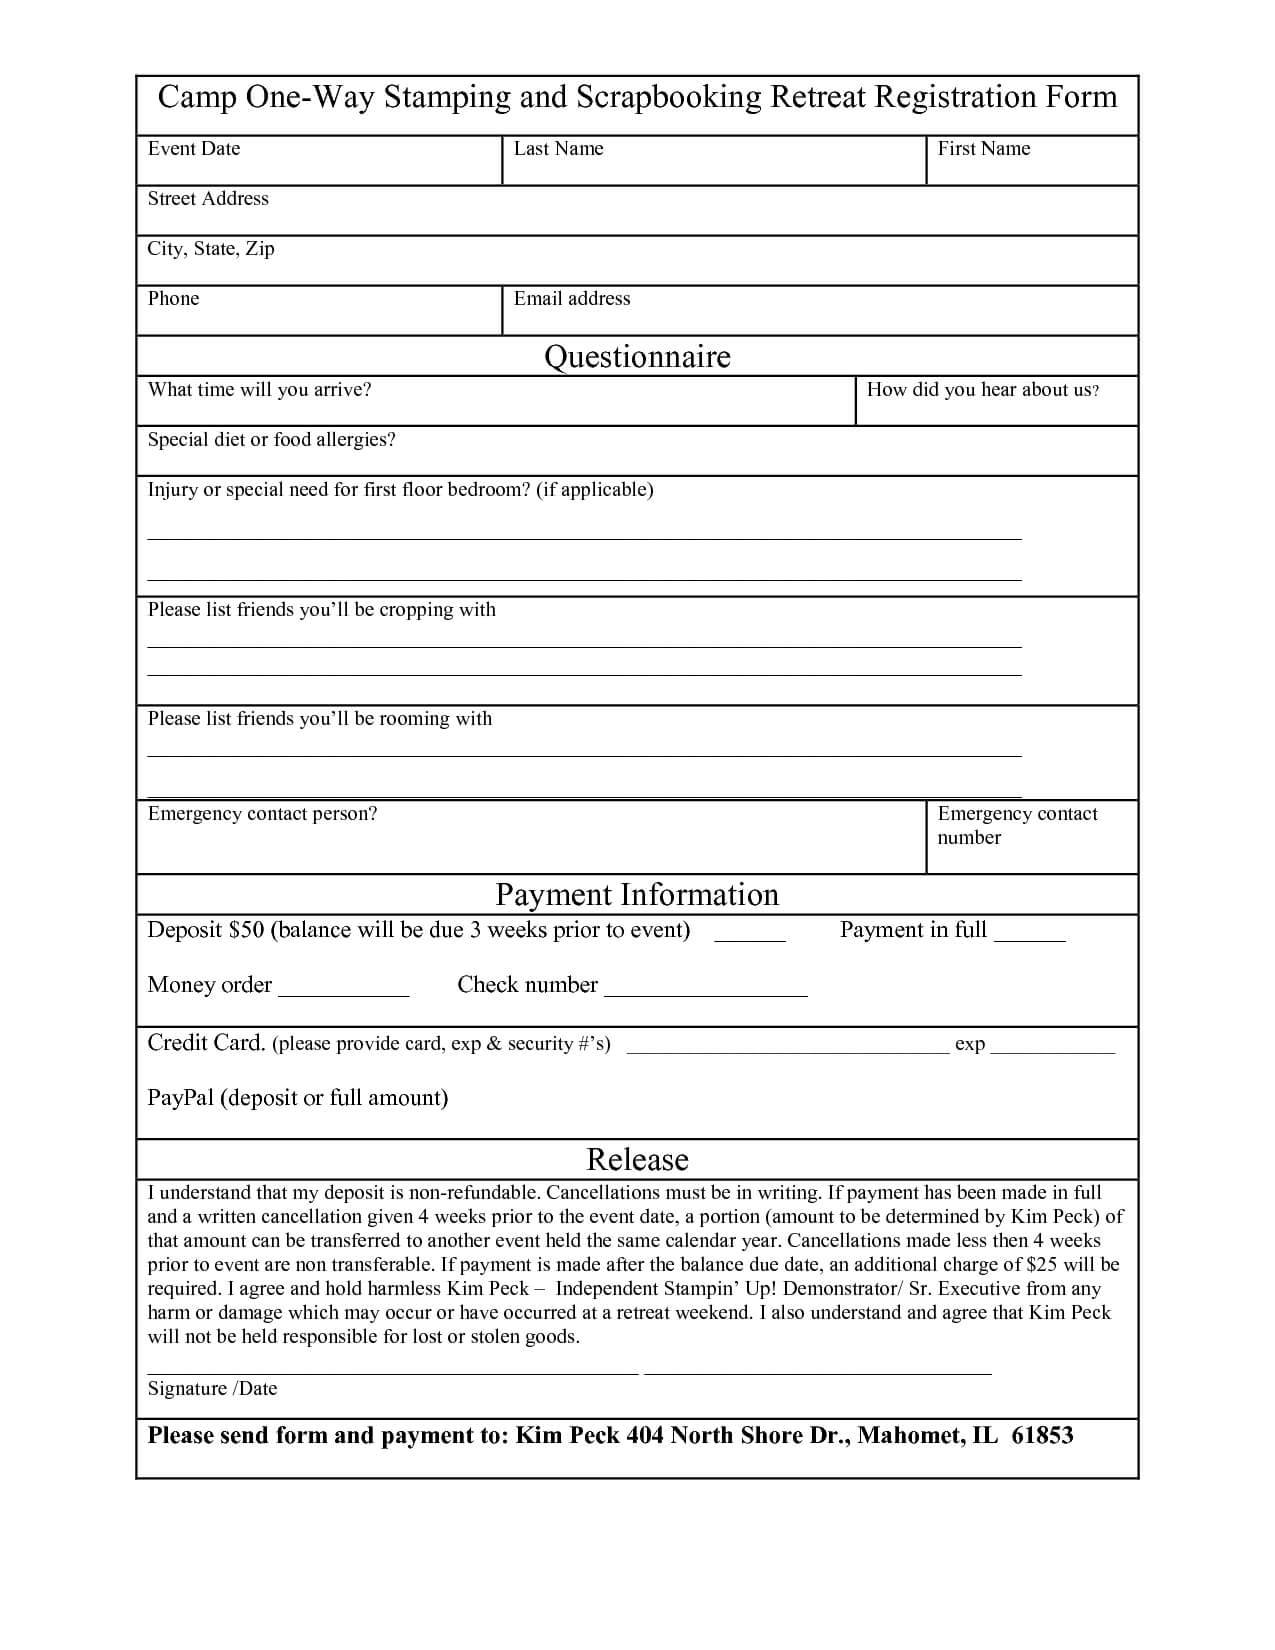 Free Registration Form Template Word Want A Free Refresher Inside Camp Registration Form Template Word